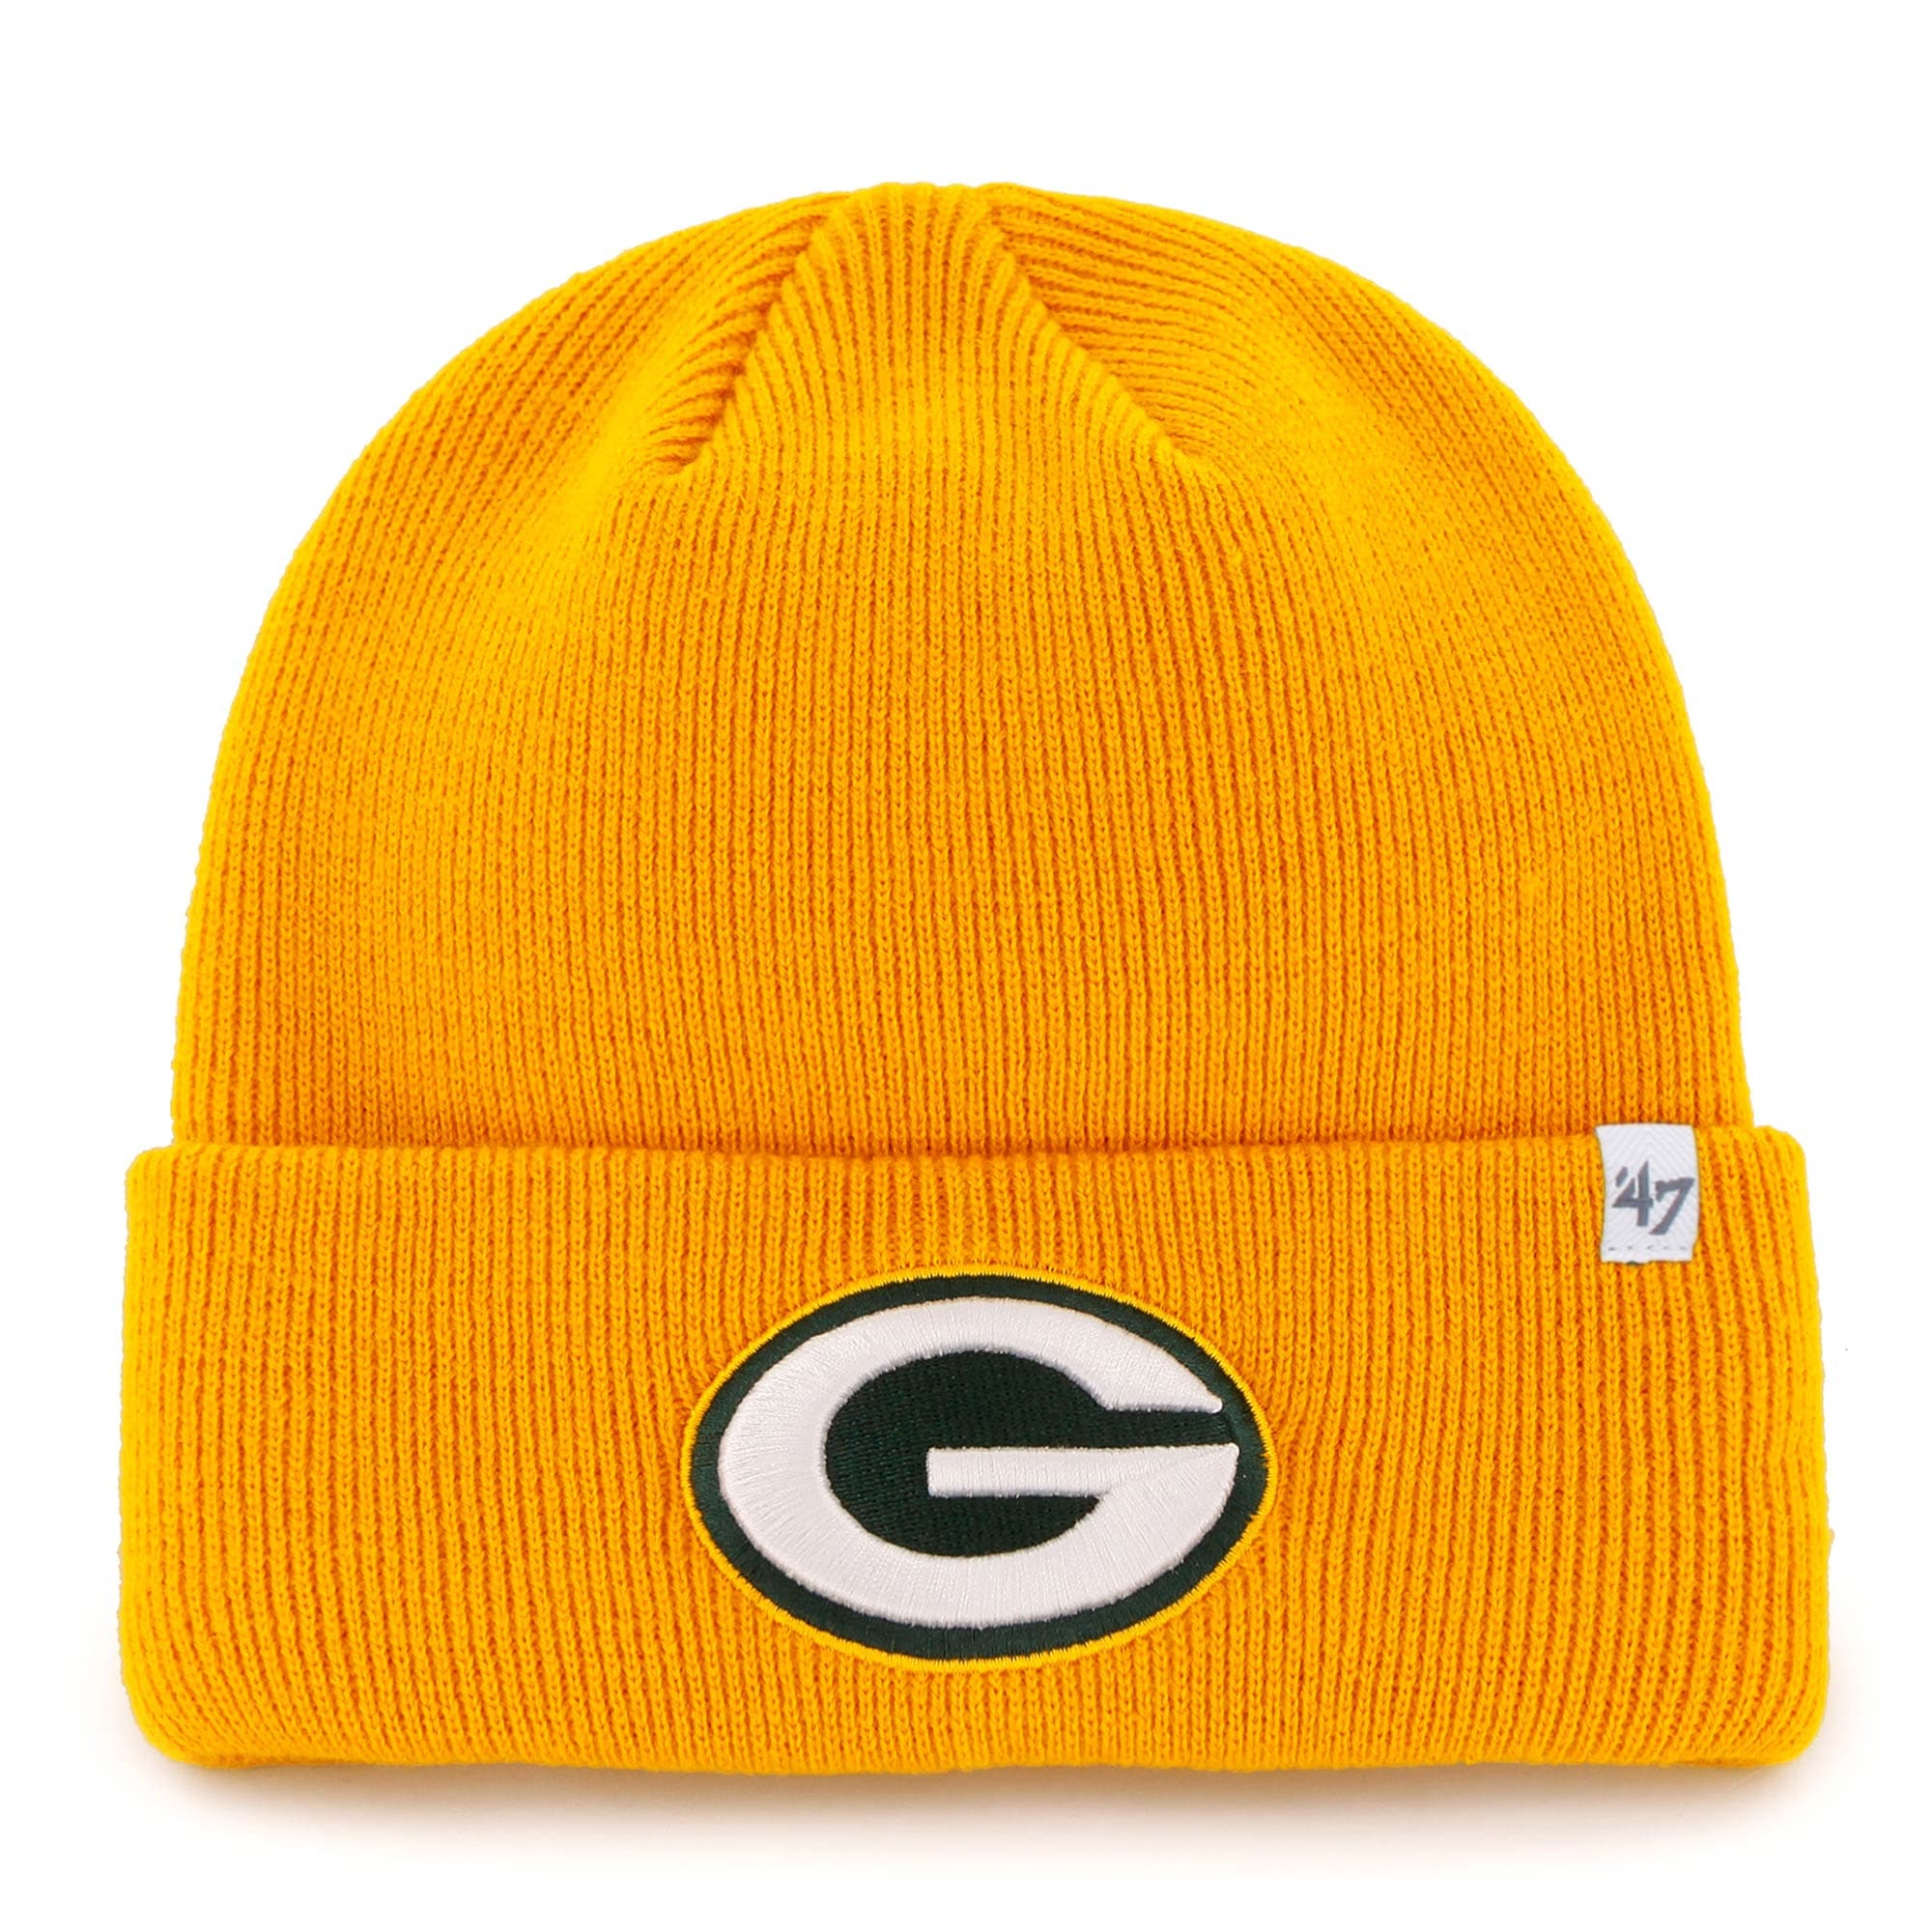 Men's '47 Gold Green Bay Packers Secondary Basic Cuffed Knit Hat - OSFA - image 1 of 1